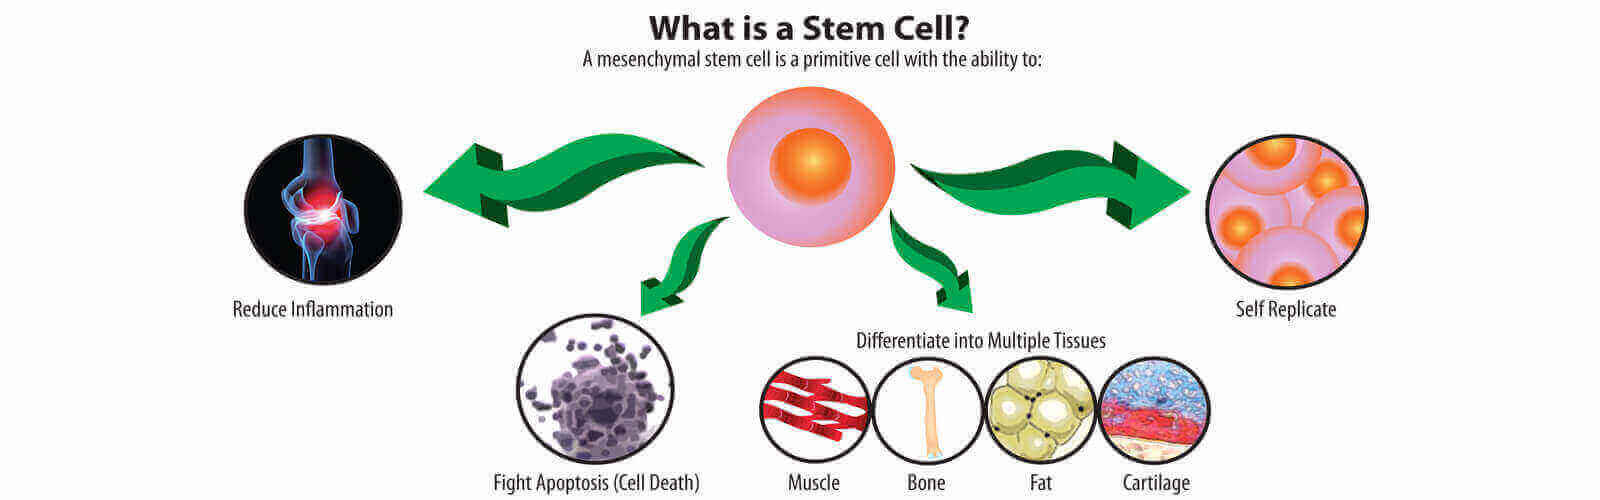 Stem Cell Treatment in Africa